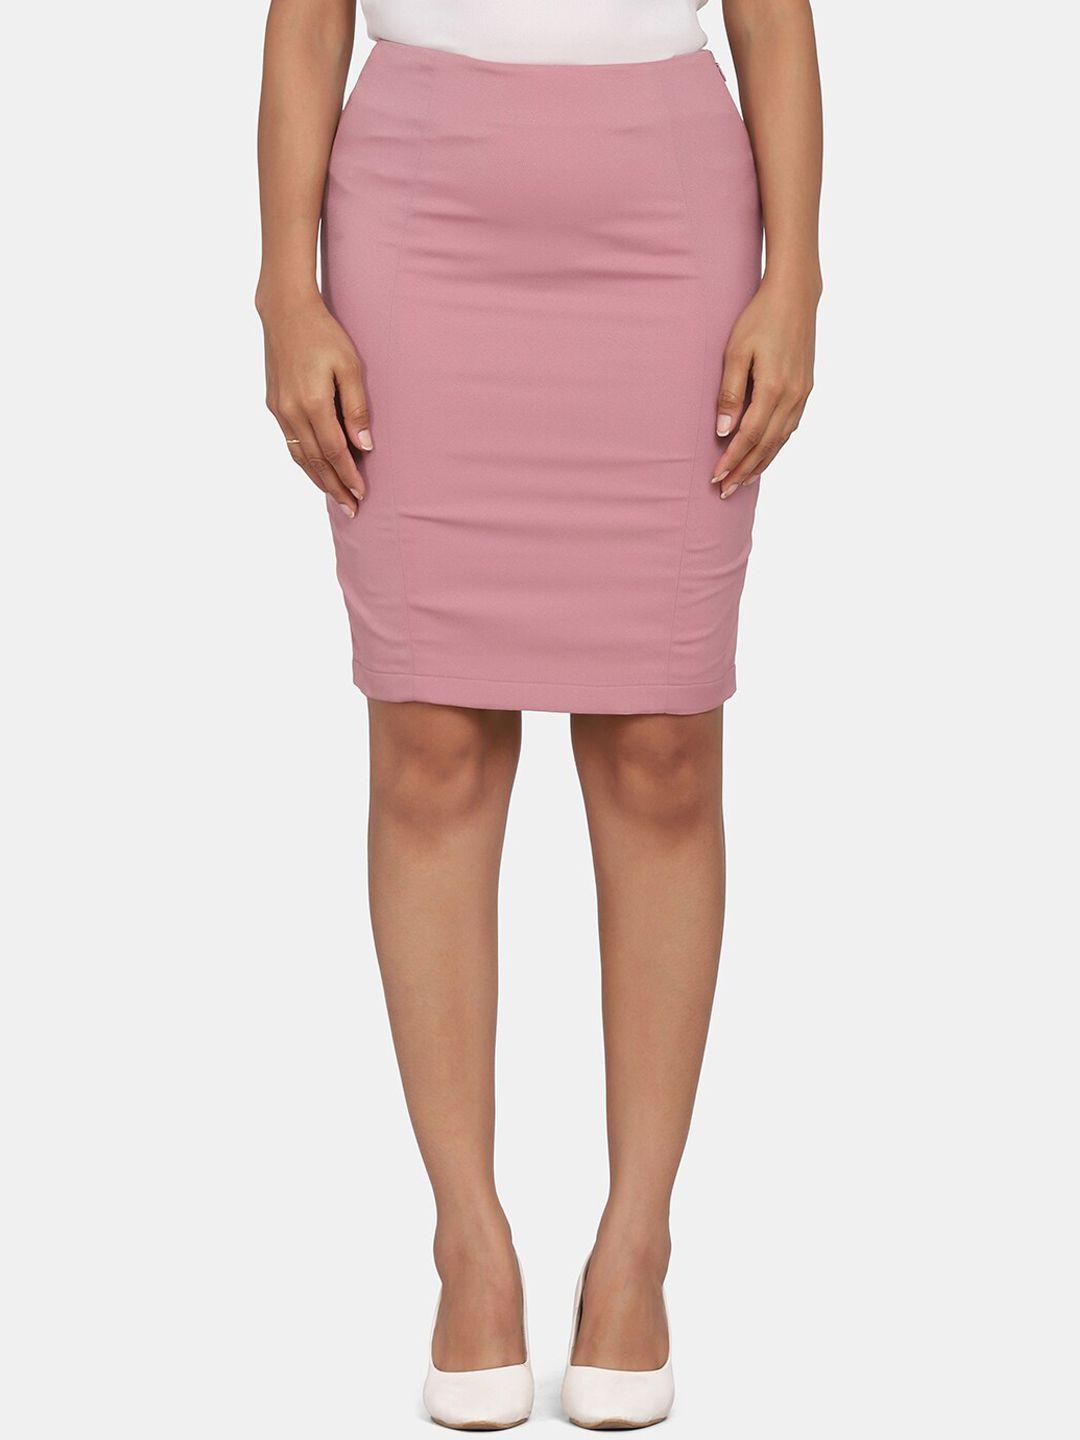 powersutra women pink solid pencil skirts